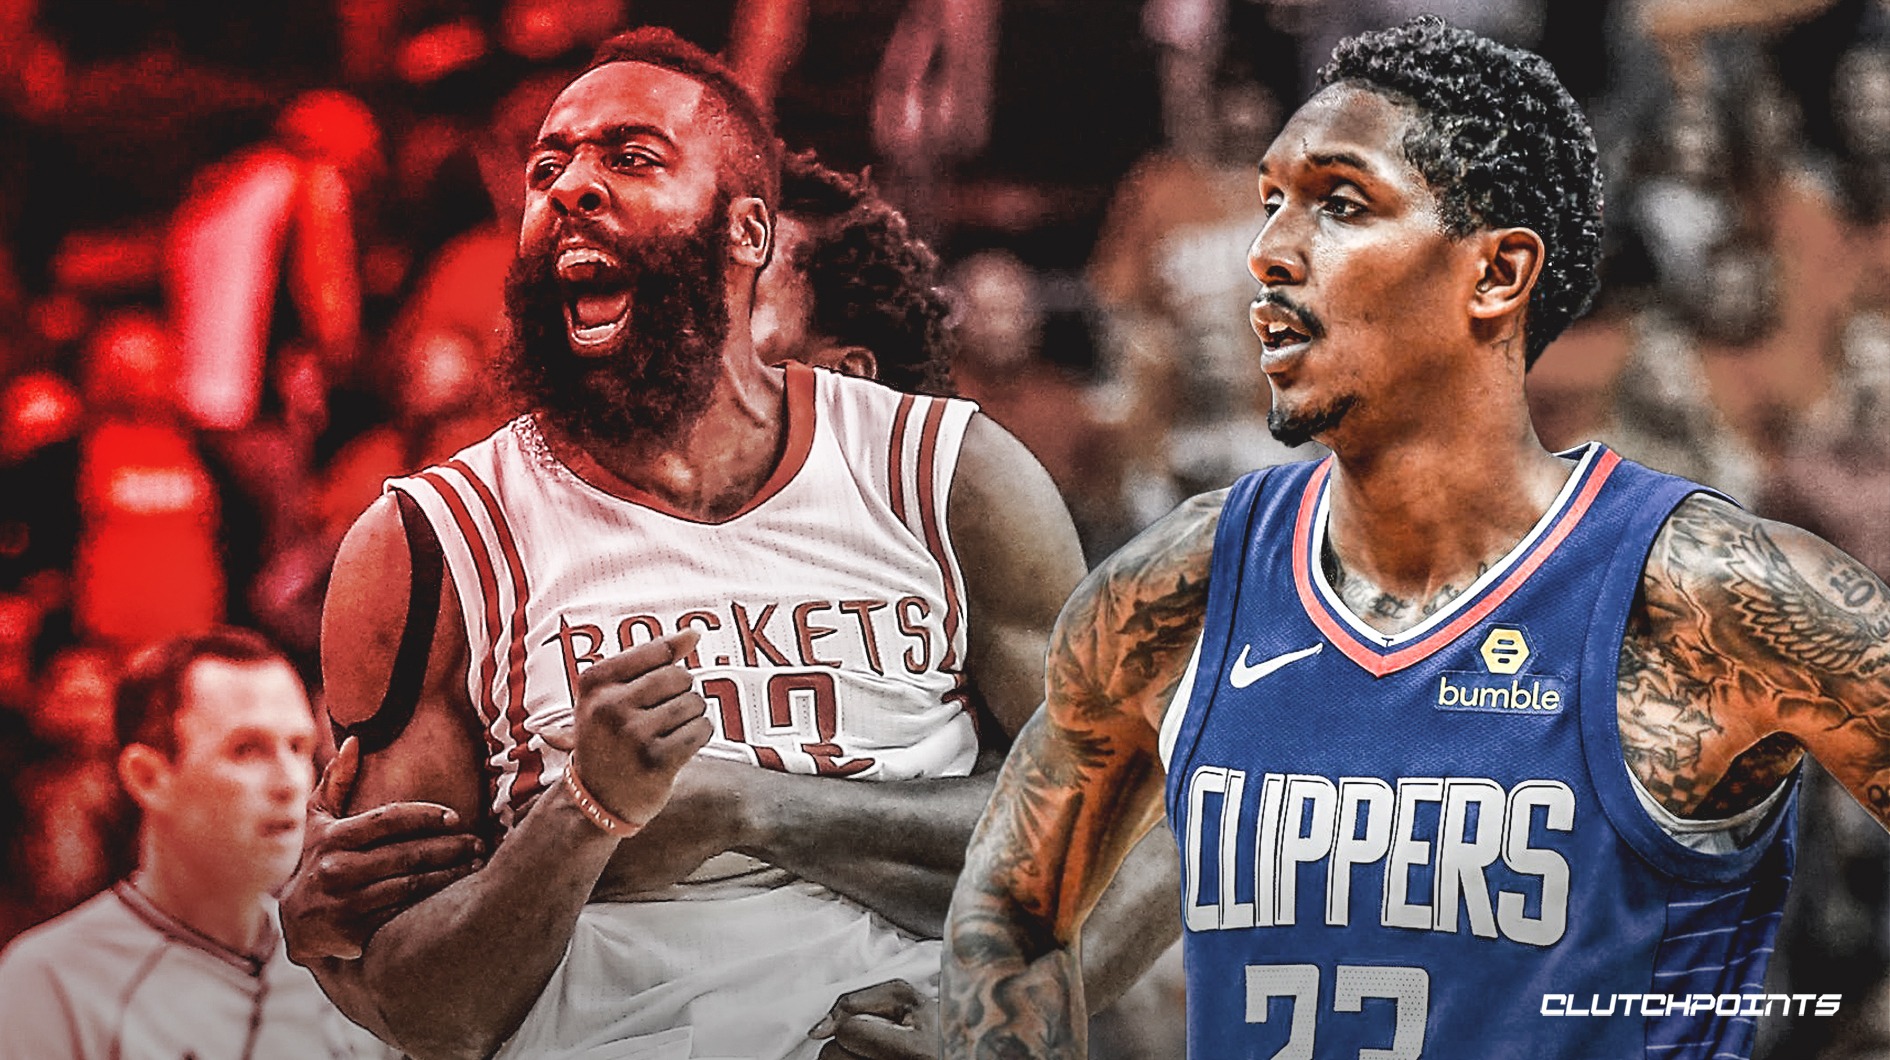 Lou Williams, James Harden, Rockets, Clippers